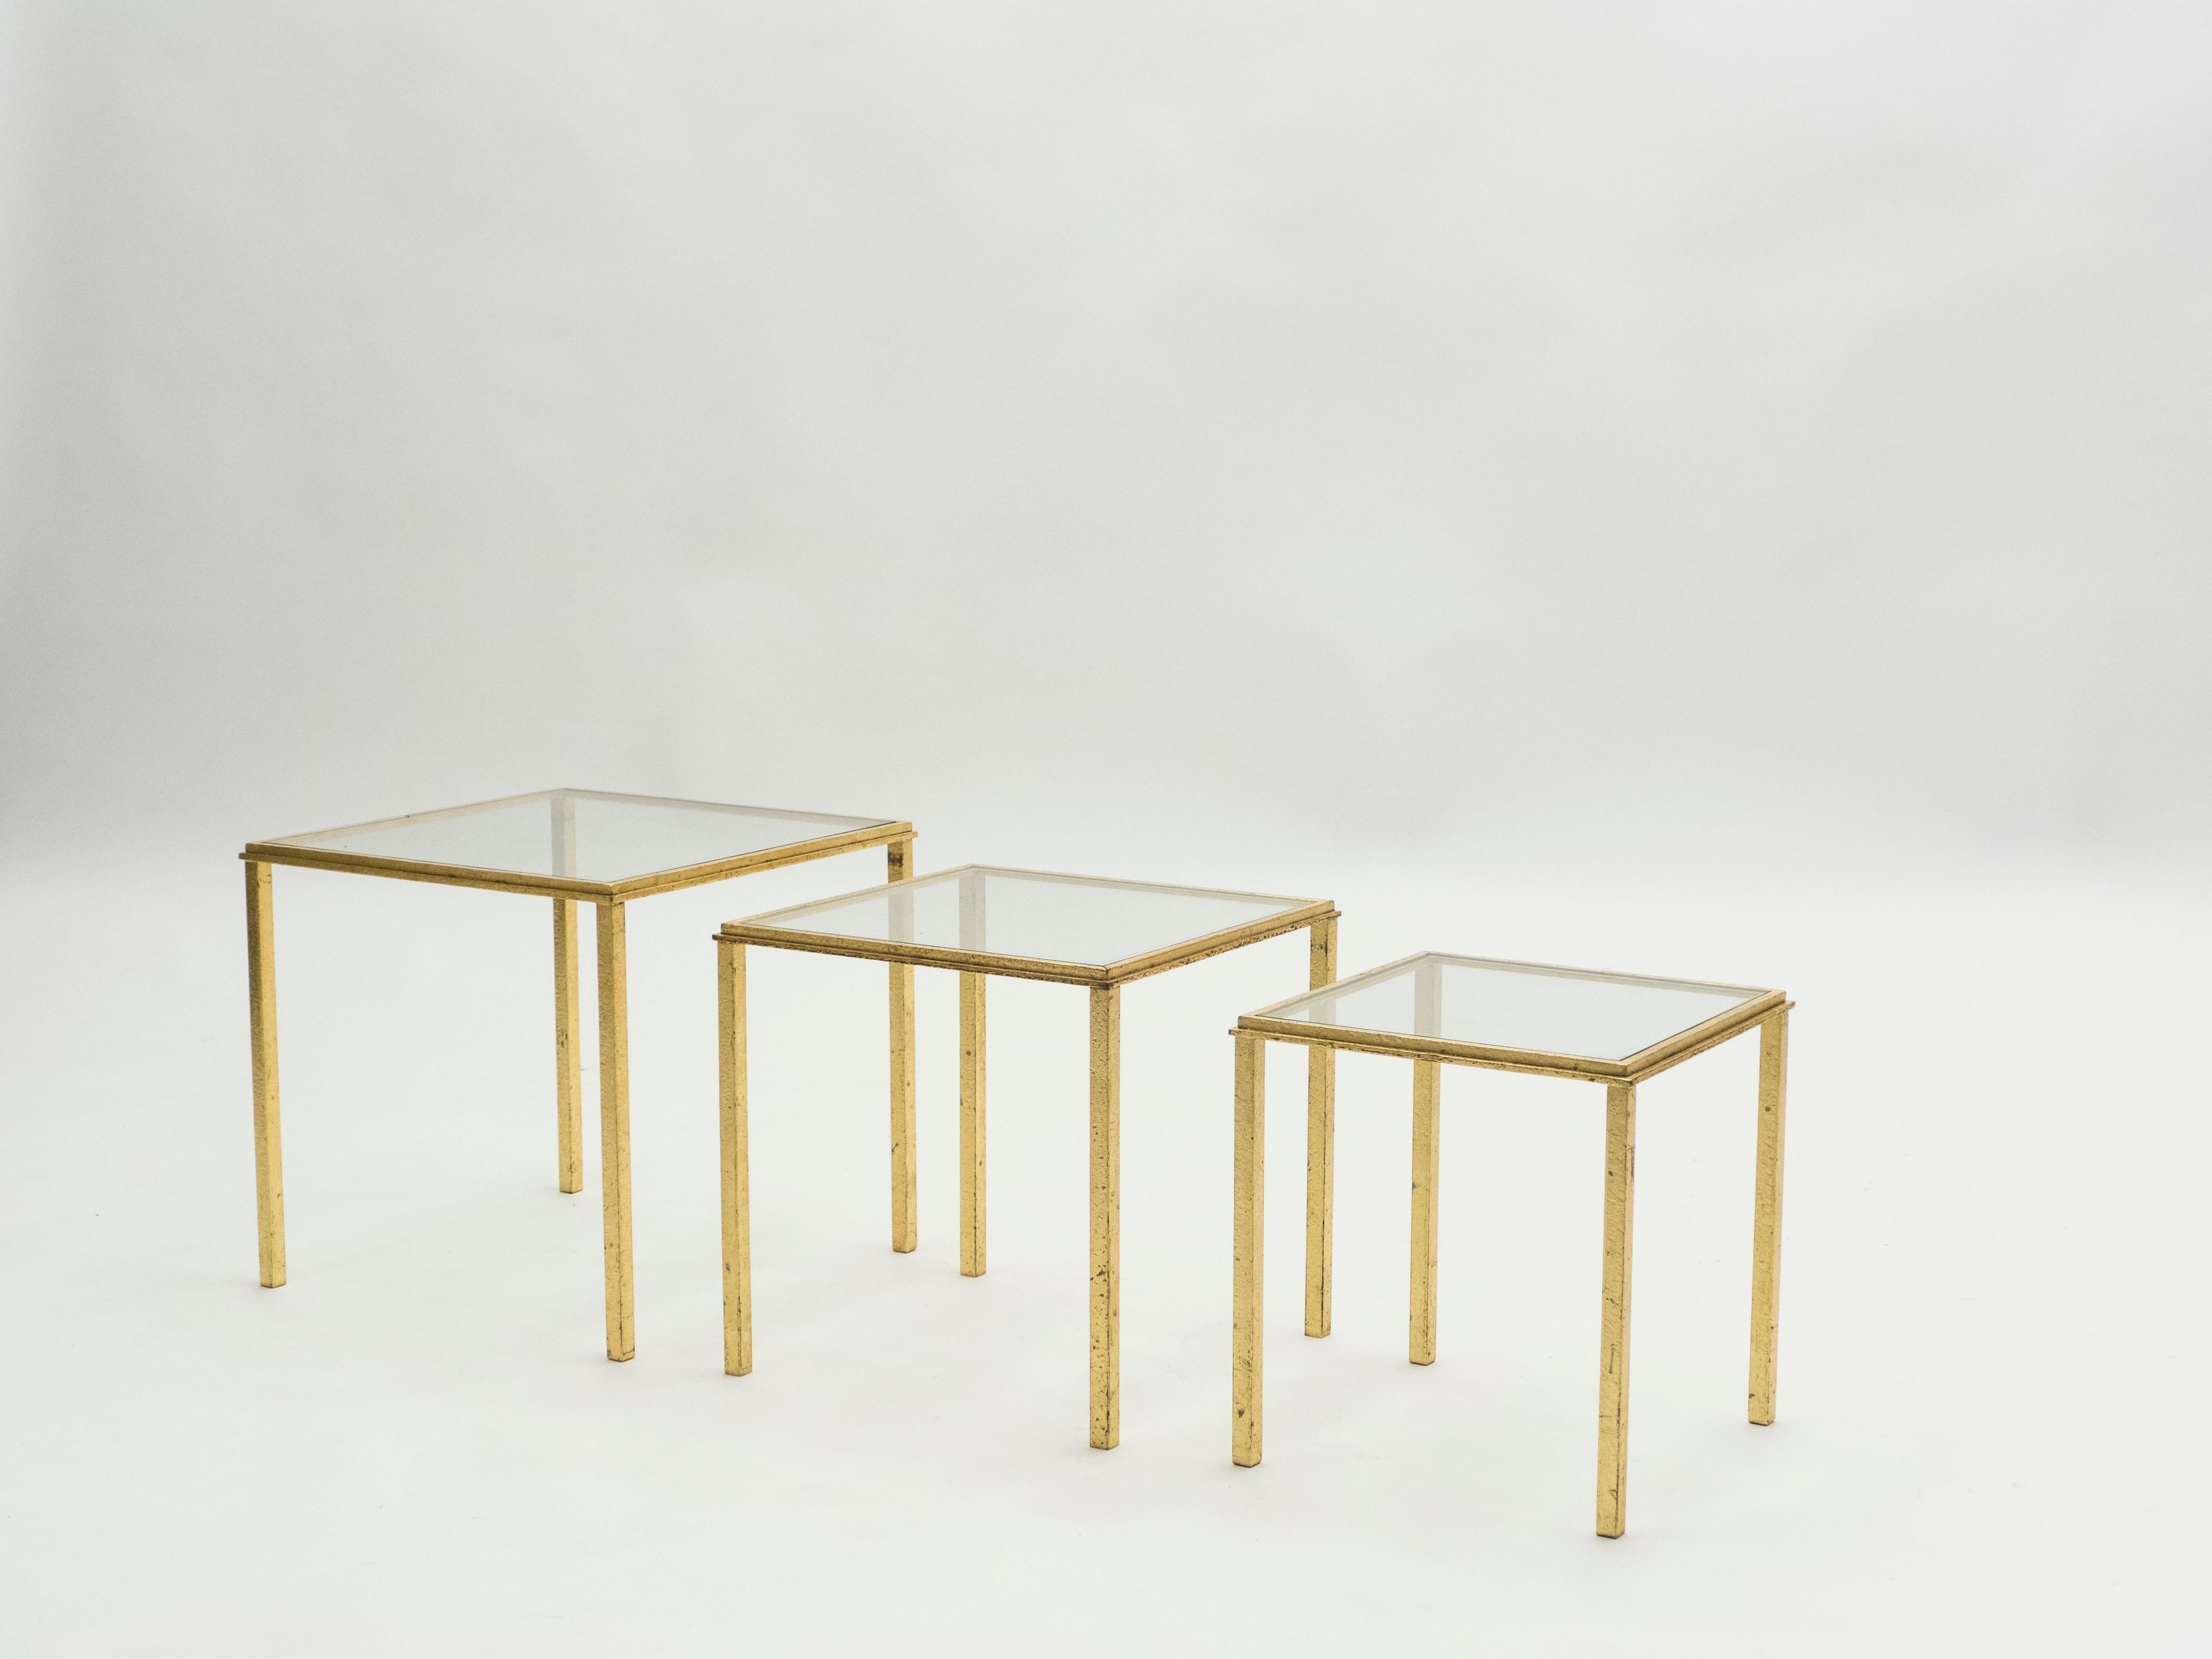 Midcentury Roger Thibier Gilt Wrought Iron Gold Leaf Nesting Tables, 1960s For Sale 1